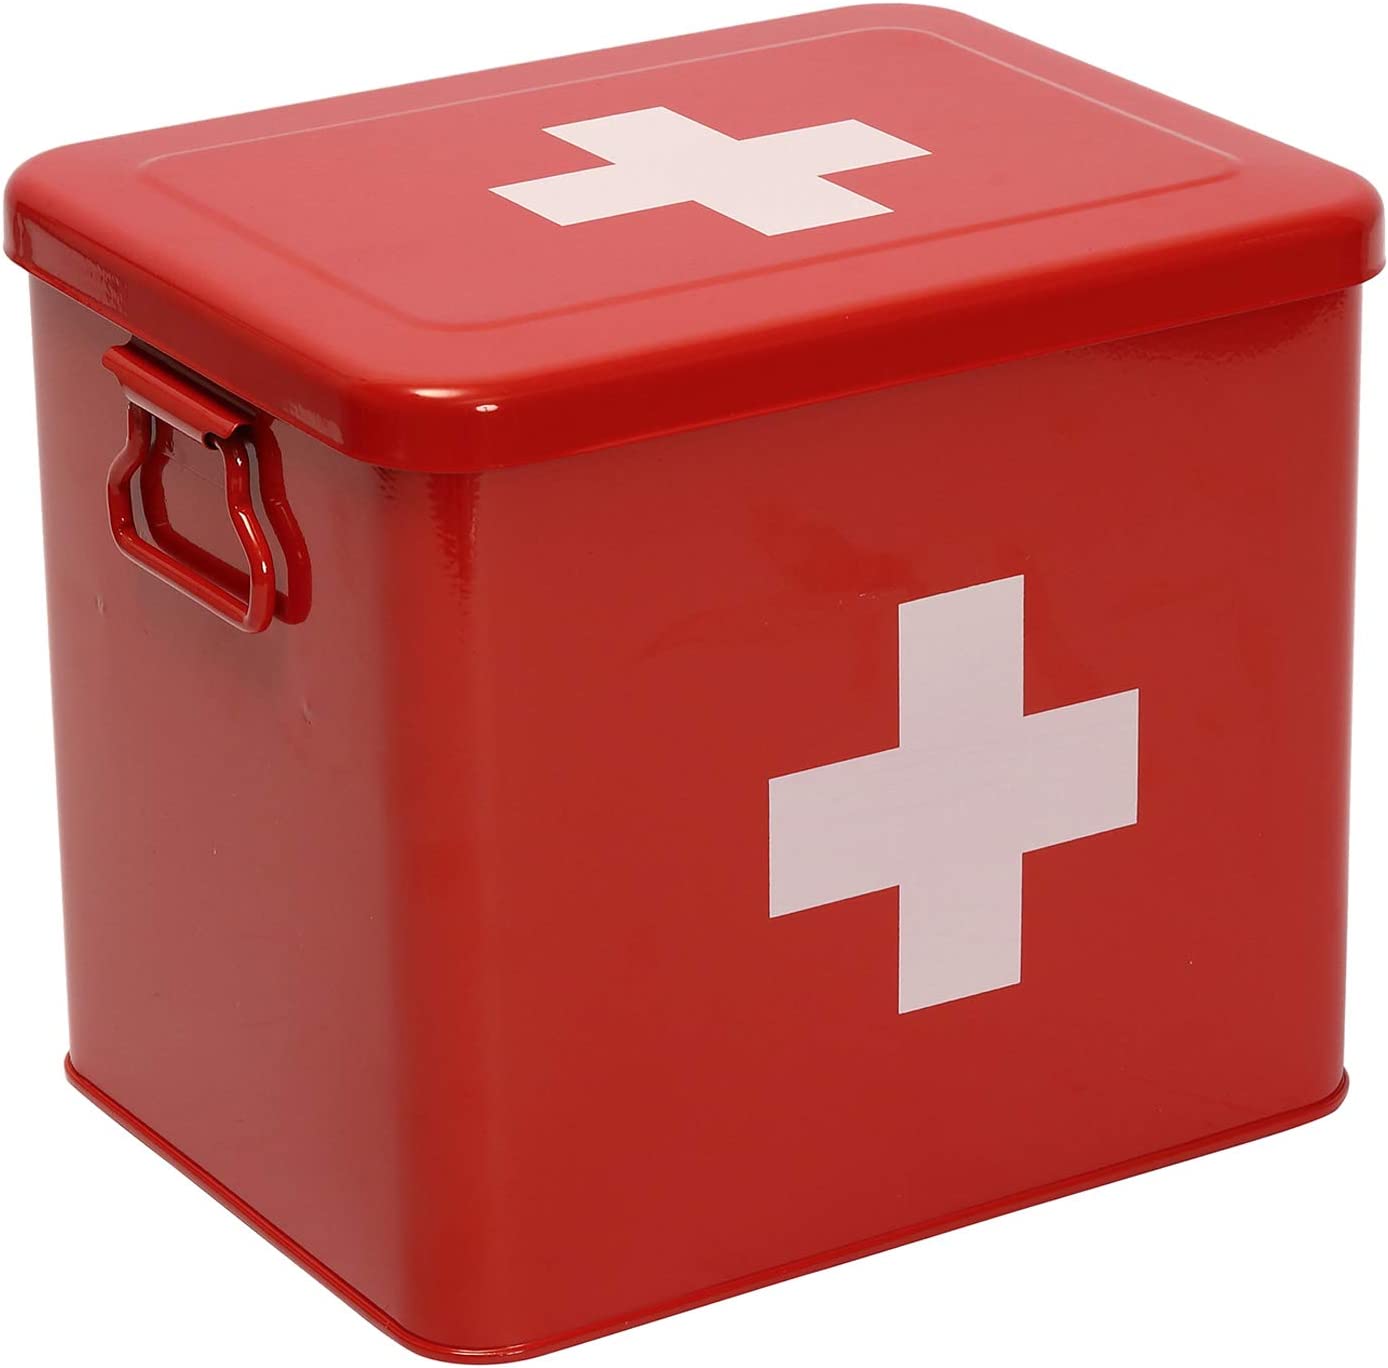 Xbopetda First Aid Kit, First Aid Medicine Supplies Bin – 2-Tier Metal Medicine Storage Tin, First Aid Box with Removable Tray for Home Emergency Tool Set-Red